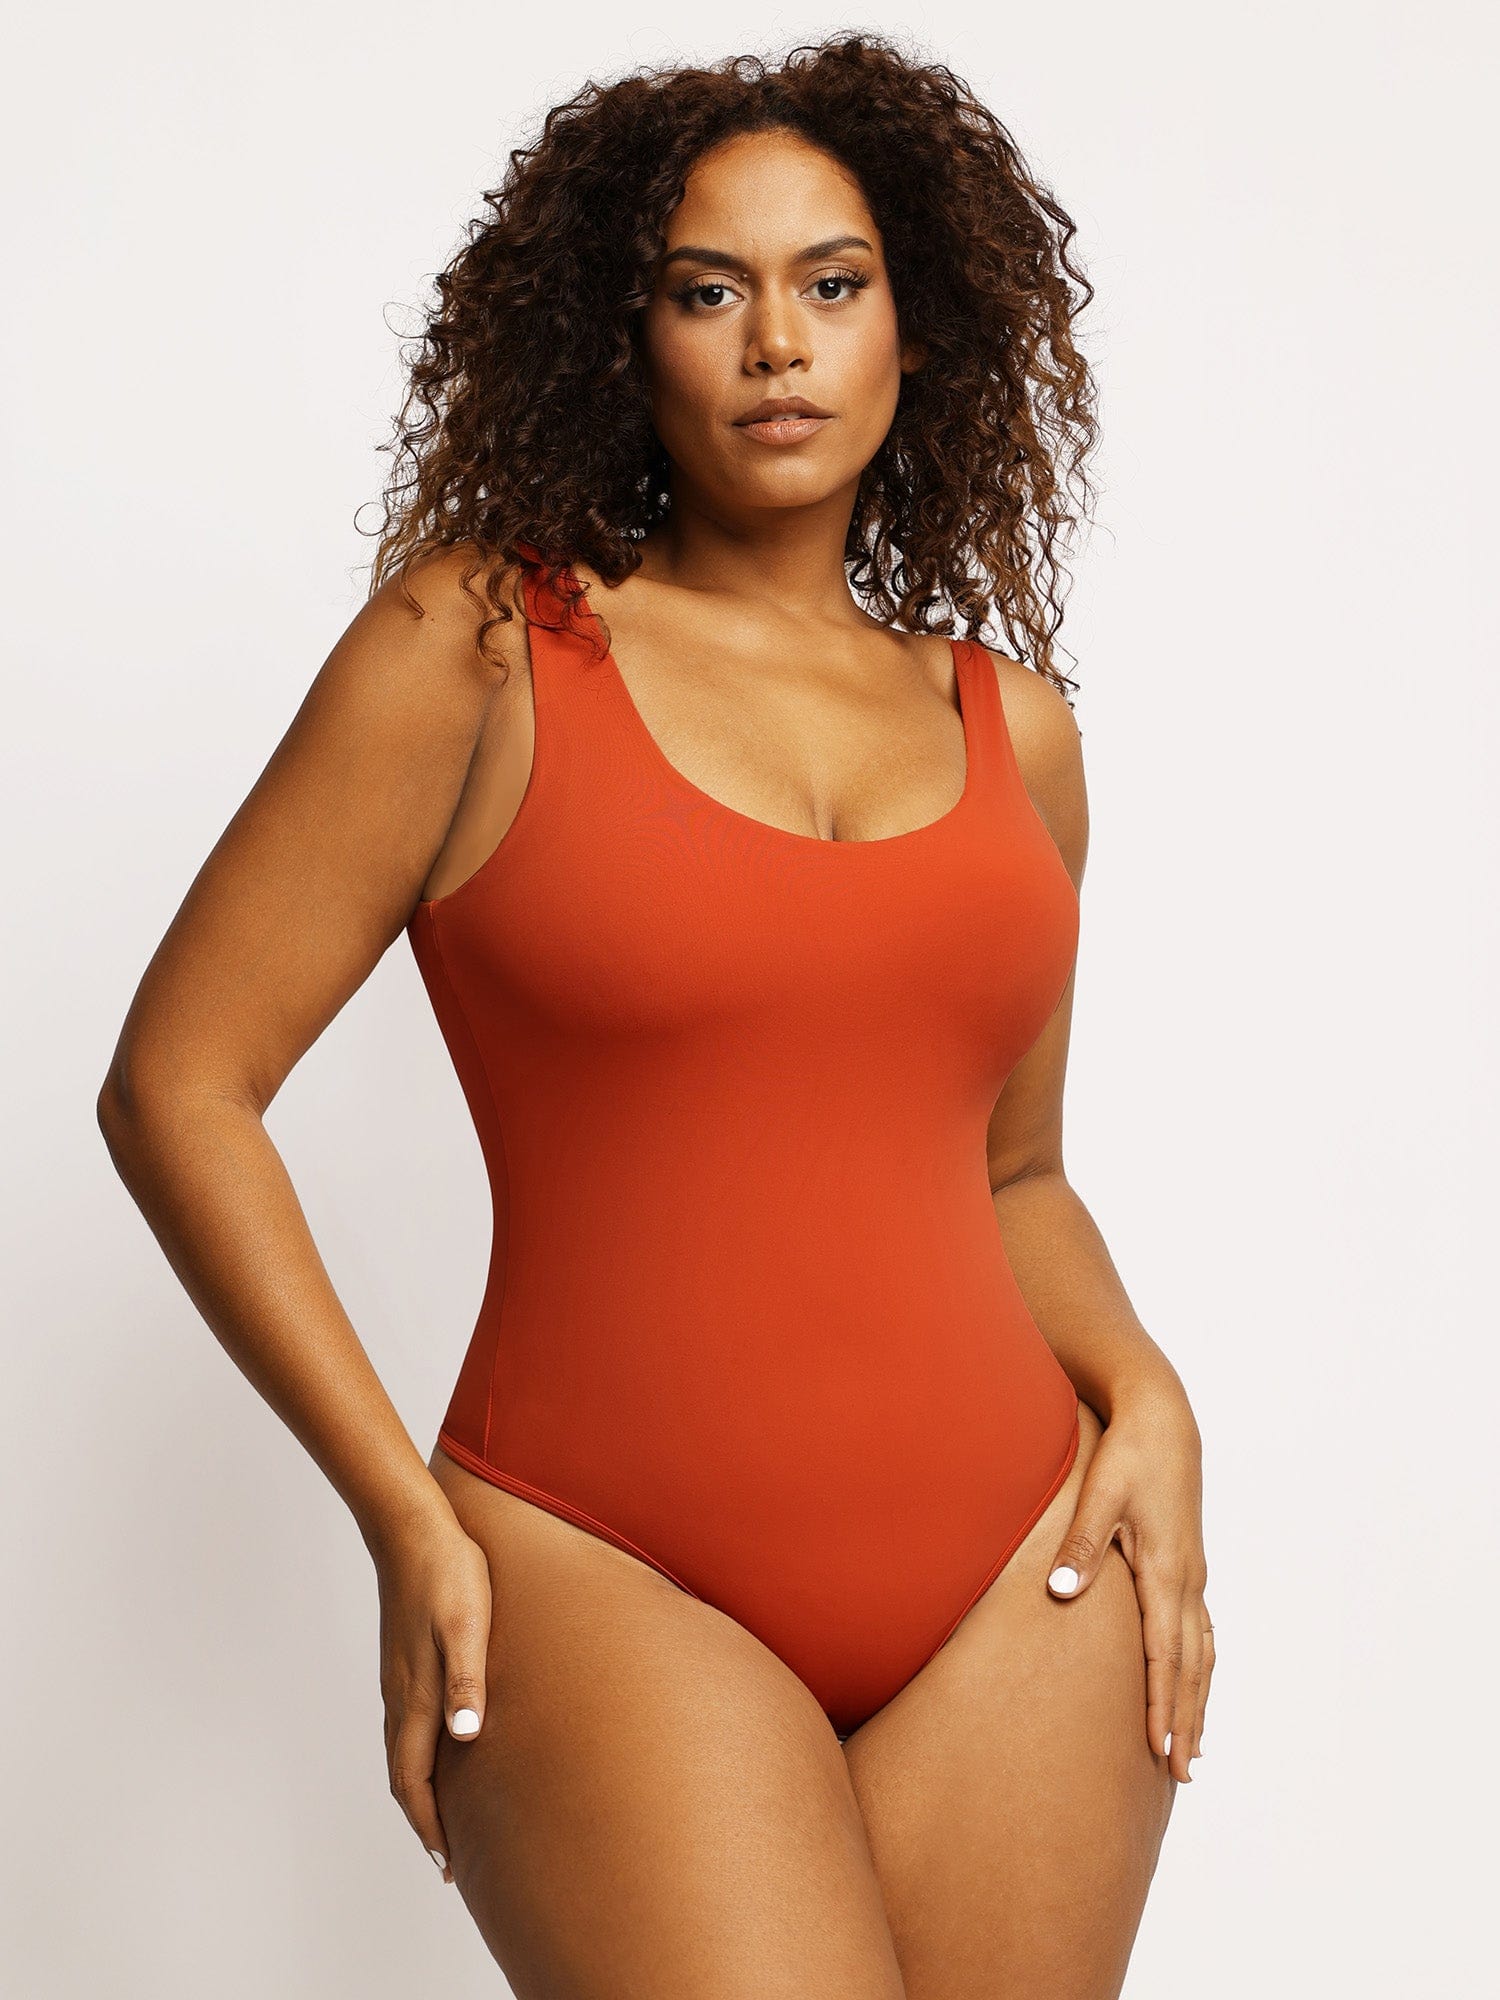 You're gonna love our scoop neck snap gusset brief bodysuit! Available in  black, mocha, nude and lavender 😍 #popilush #popilushofficial #bodysuit, By Popilush